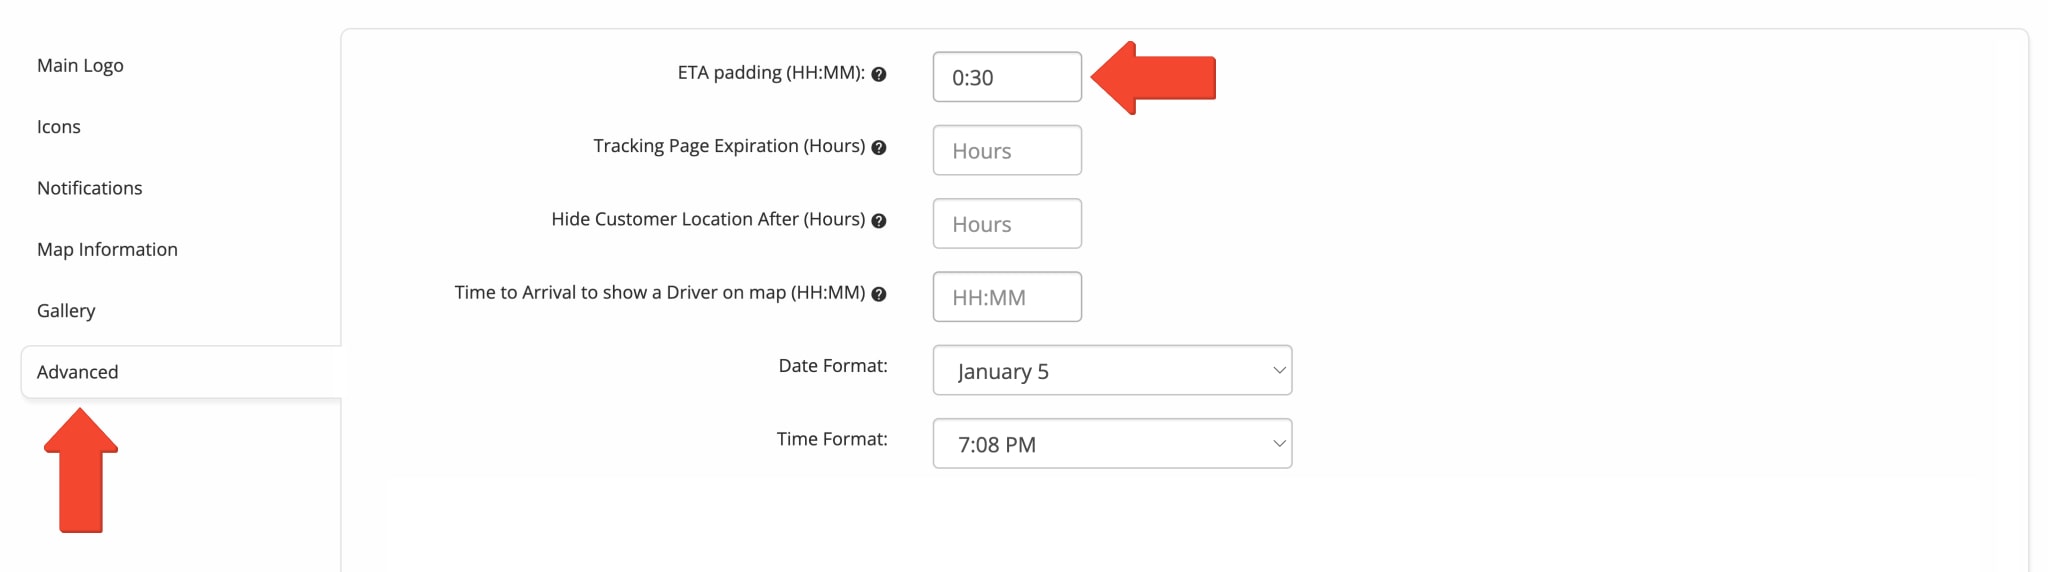 Make sure that the ETA Padding (HH:MM) field in the Advanced menu tab is not empty.